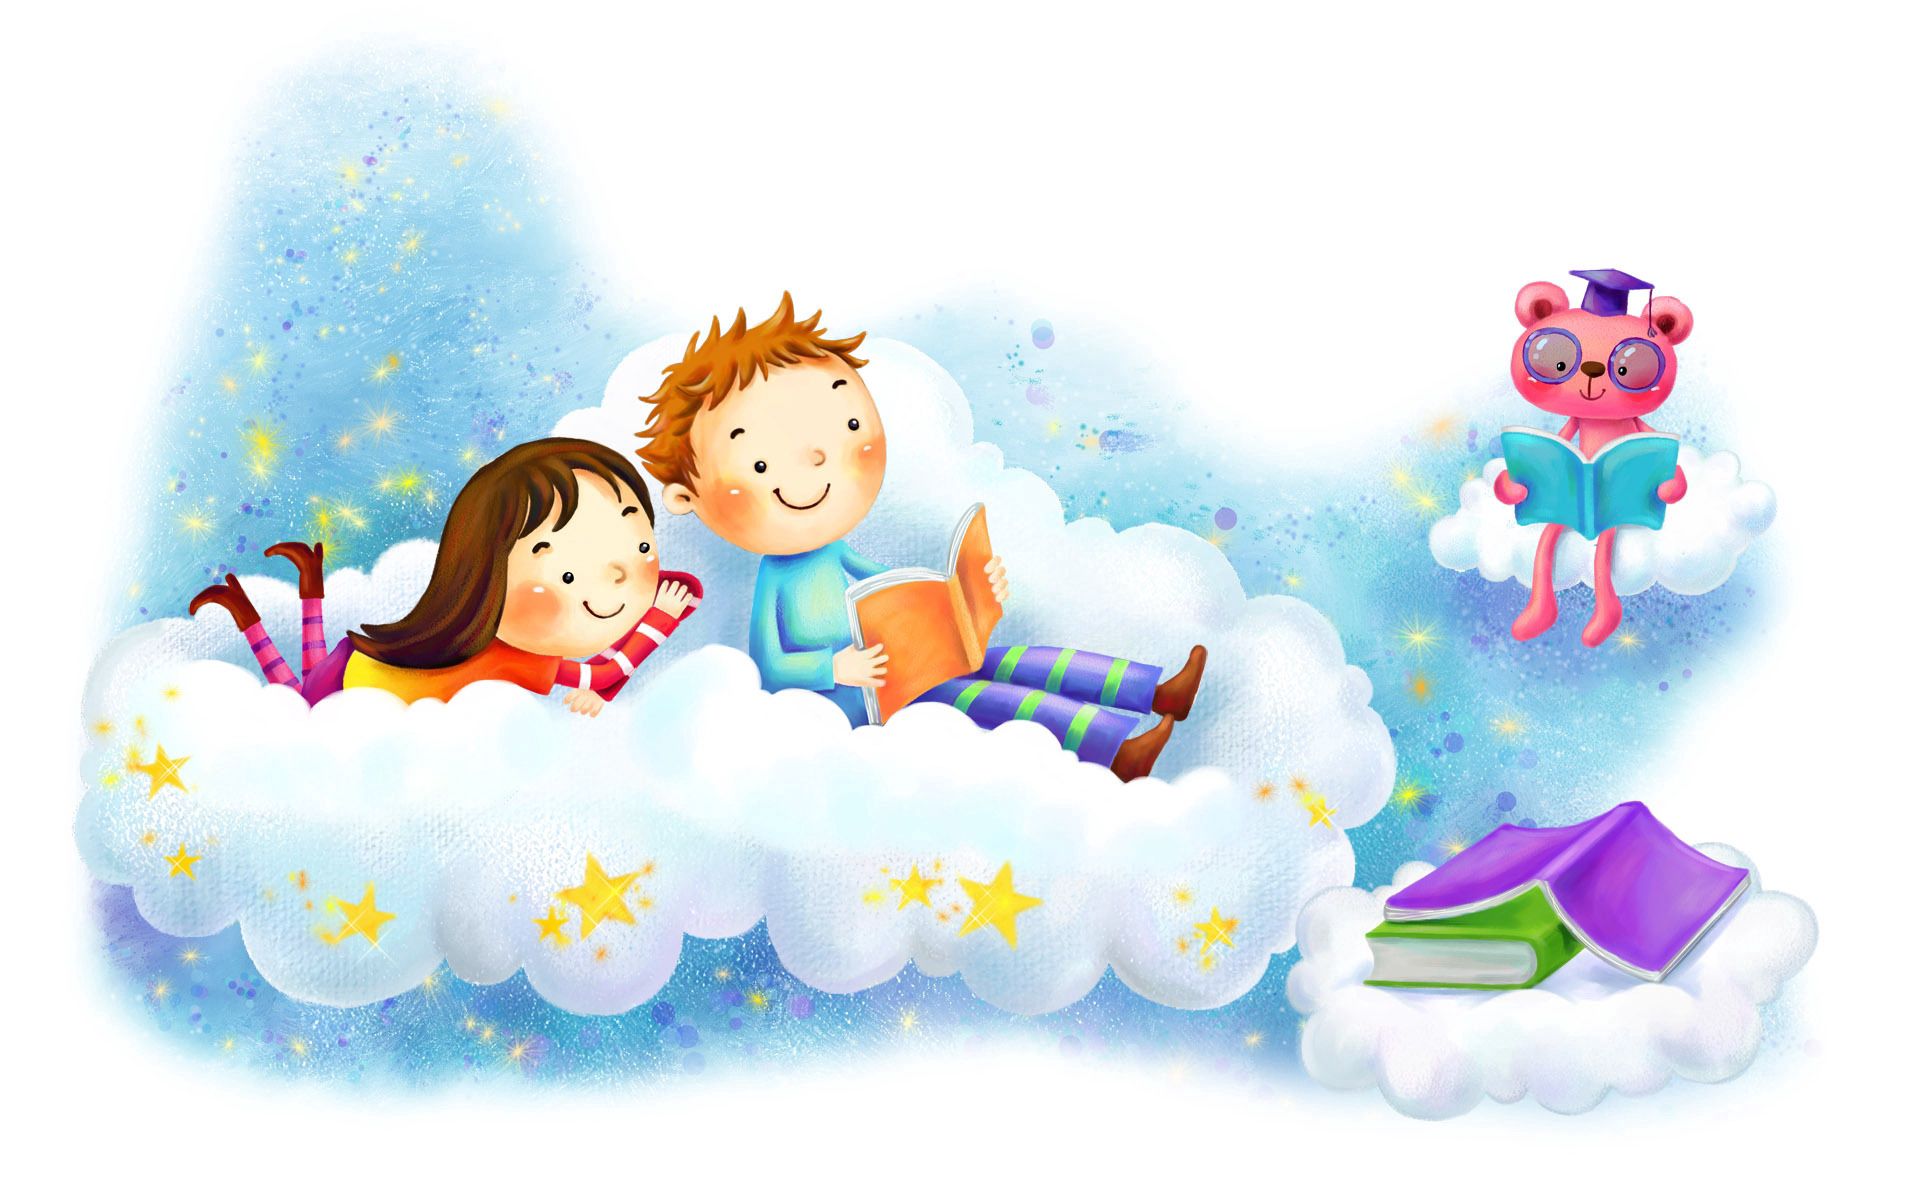 picture, books, drawing, smiles, fantasy, stars, love, smile, girl, cloud, boy